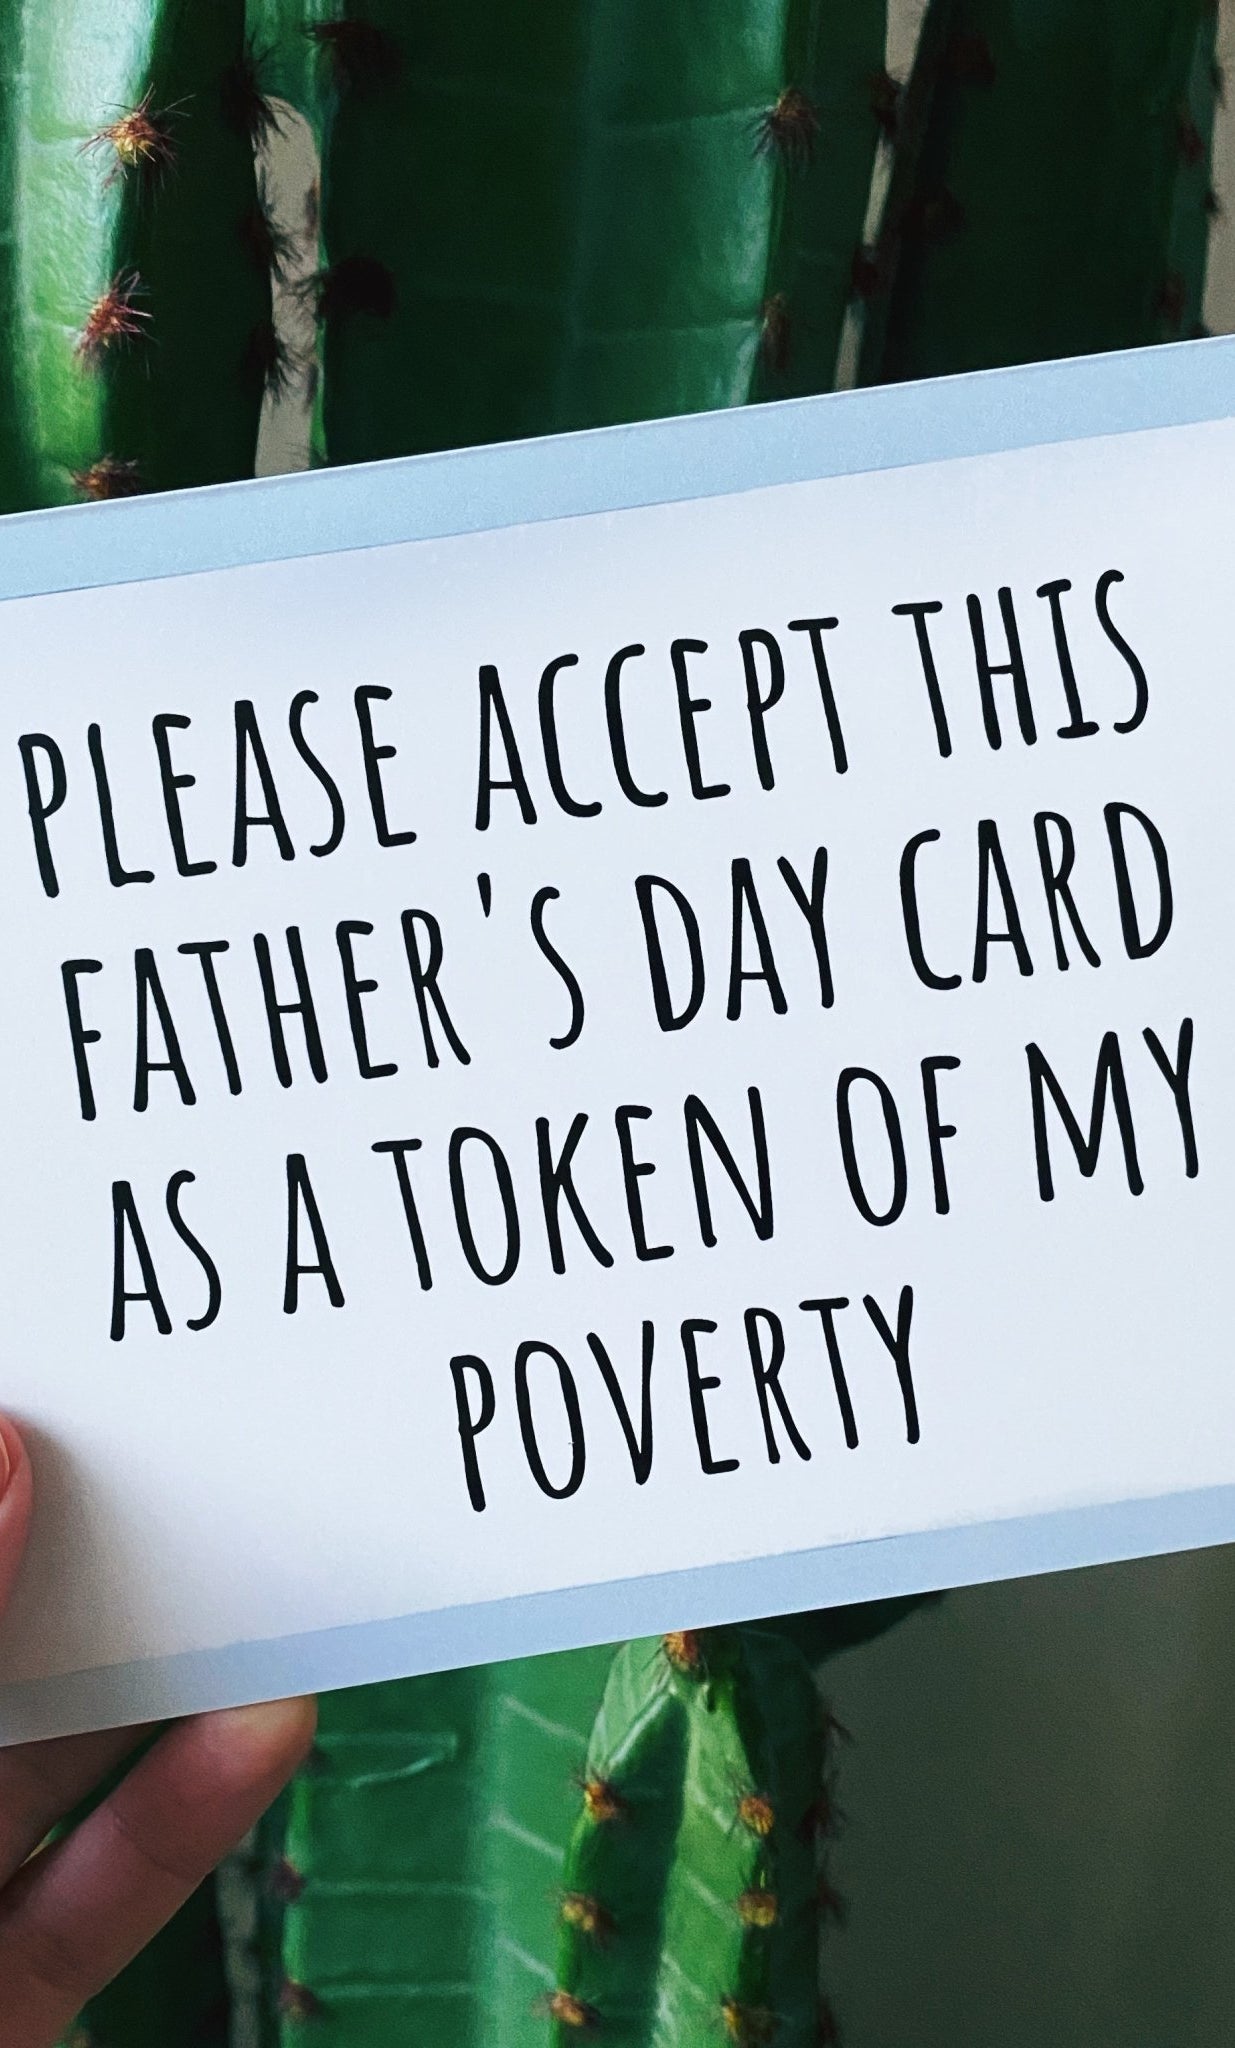 Please Accept This Father's Day Card As A Token Of My Poverty Father's Day Card - UntamedEgo LLC.